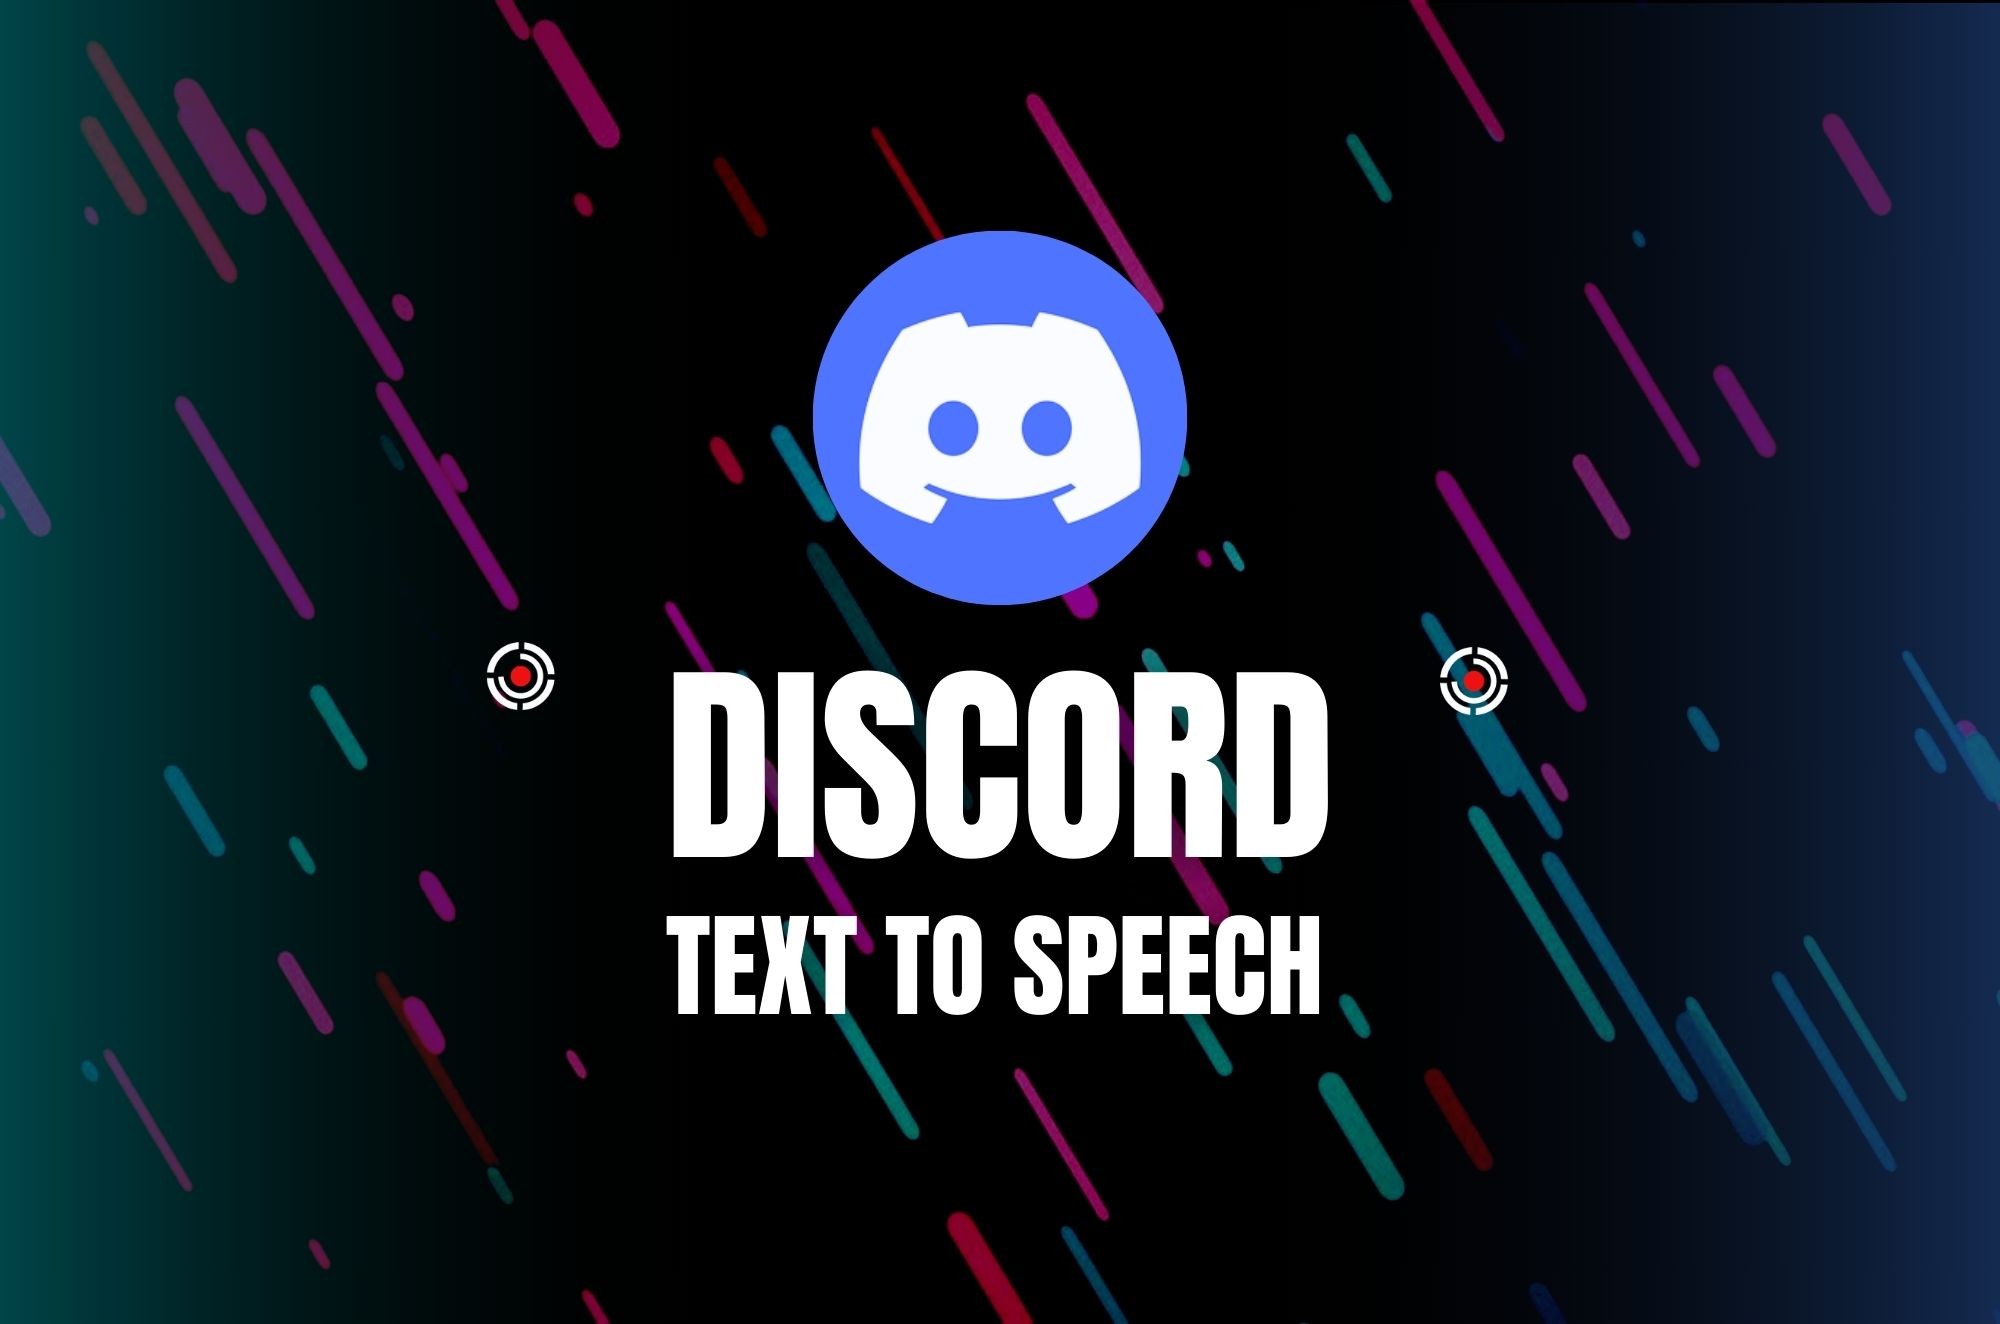 How to Use Discord Text to Speech